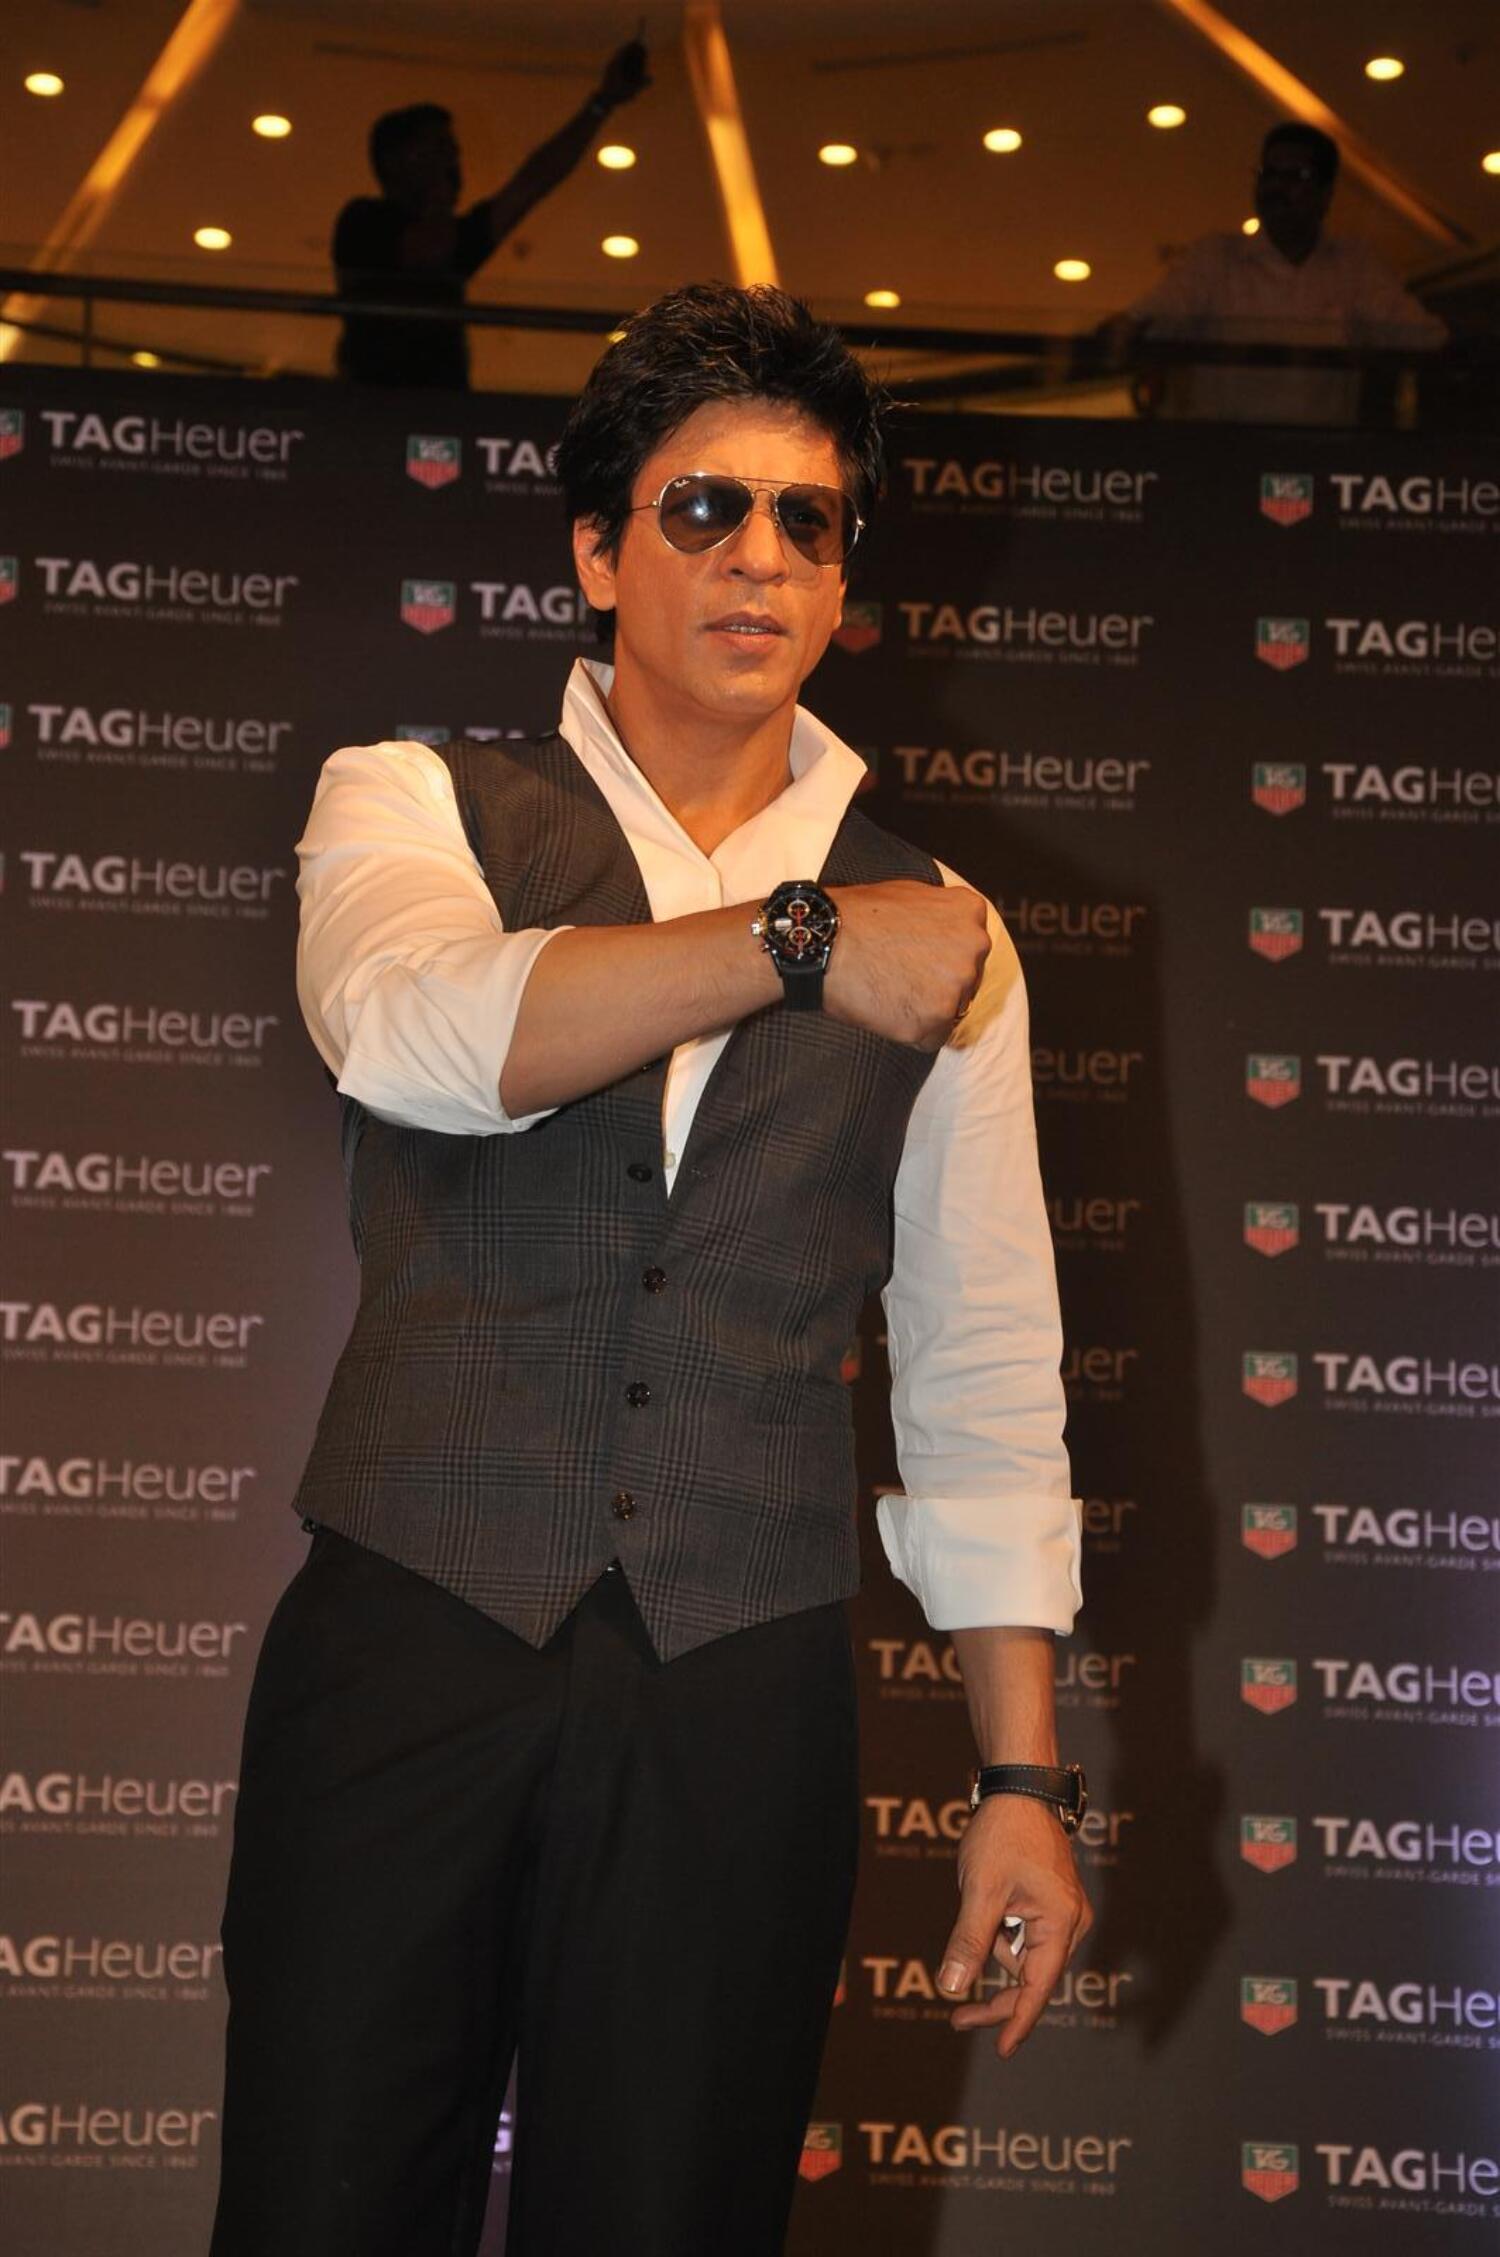 Brand Ambassador Shah Rukh Khan Posing With Tag Heuer Watches At The Launch Of The New Boutique 3409